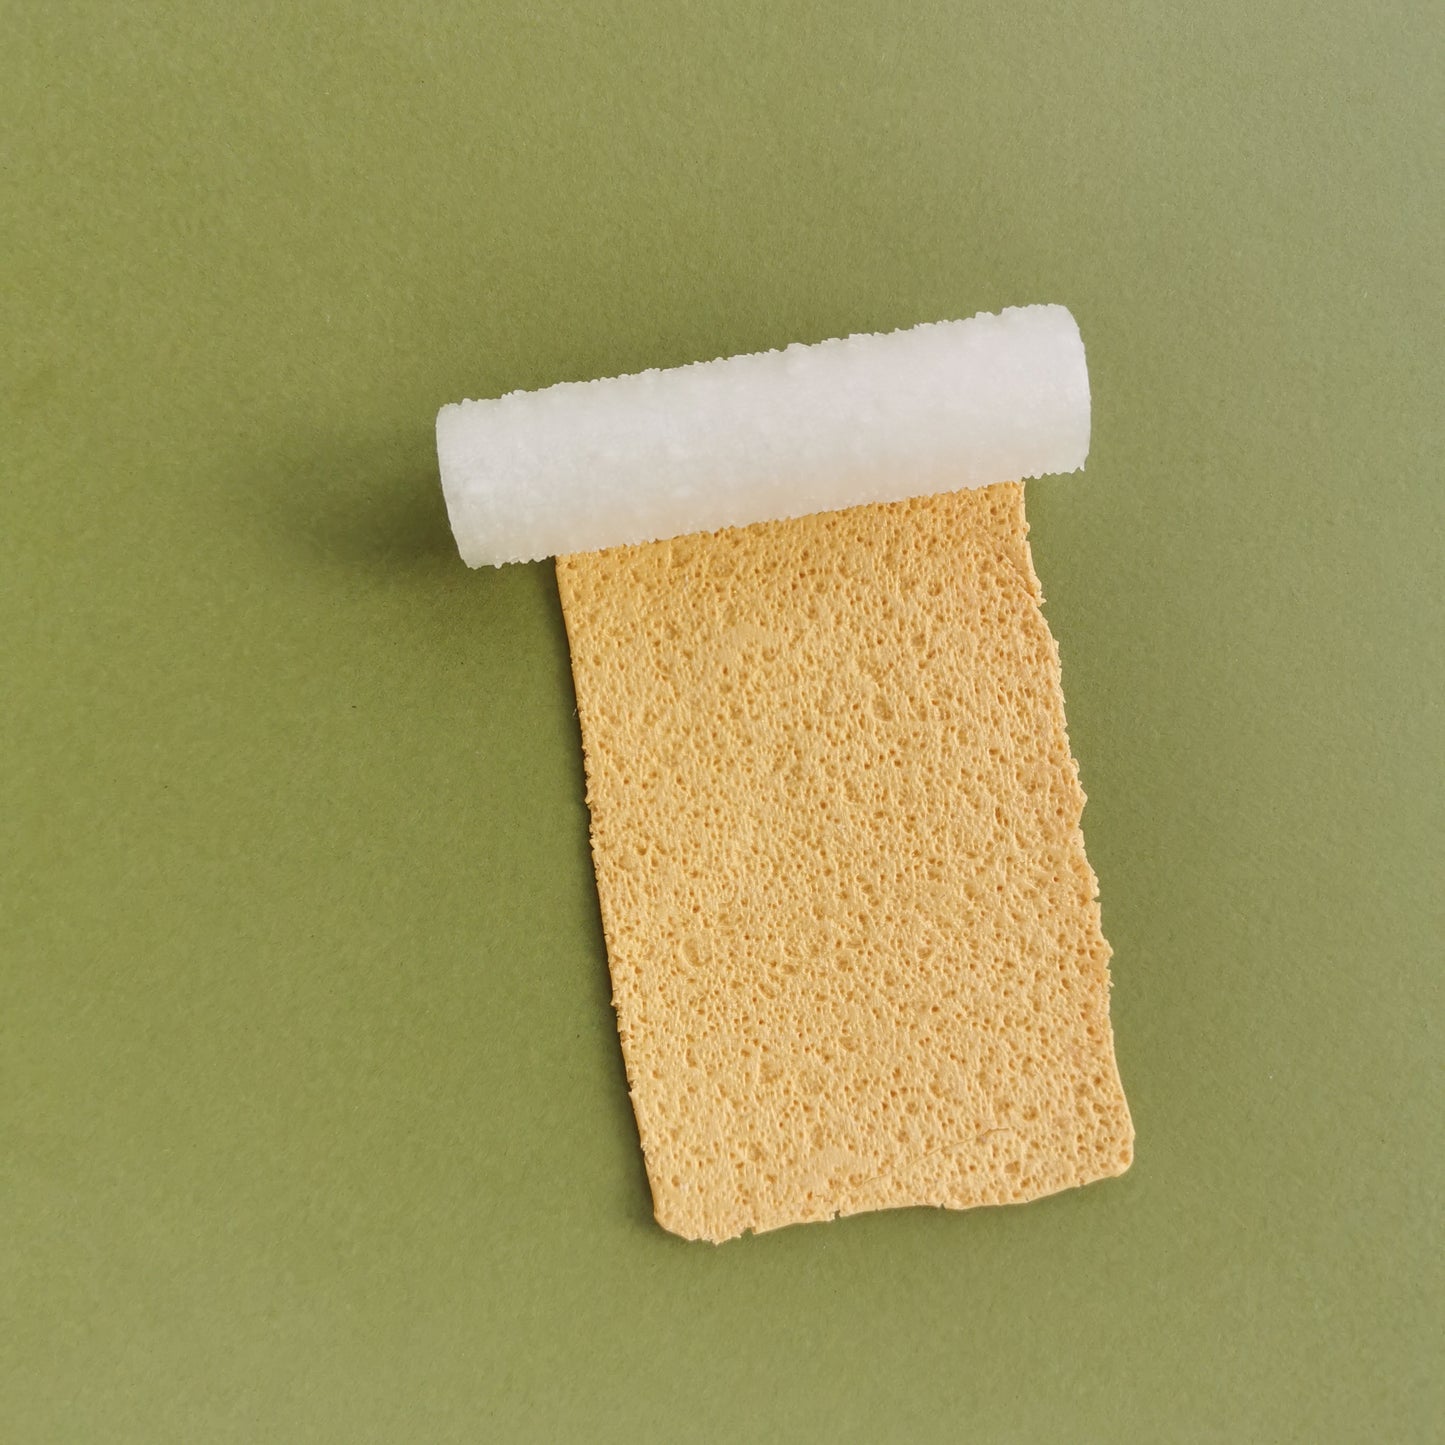 Sponge texture roller for polymer clay